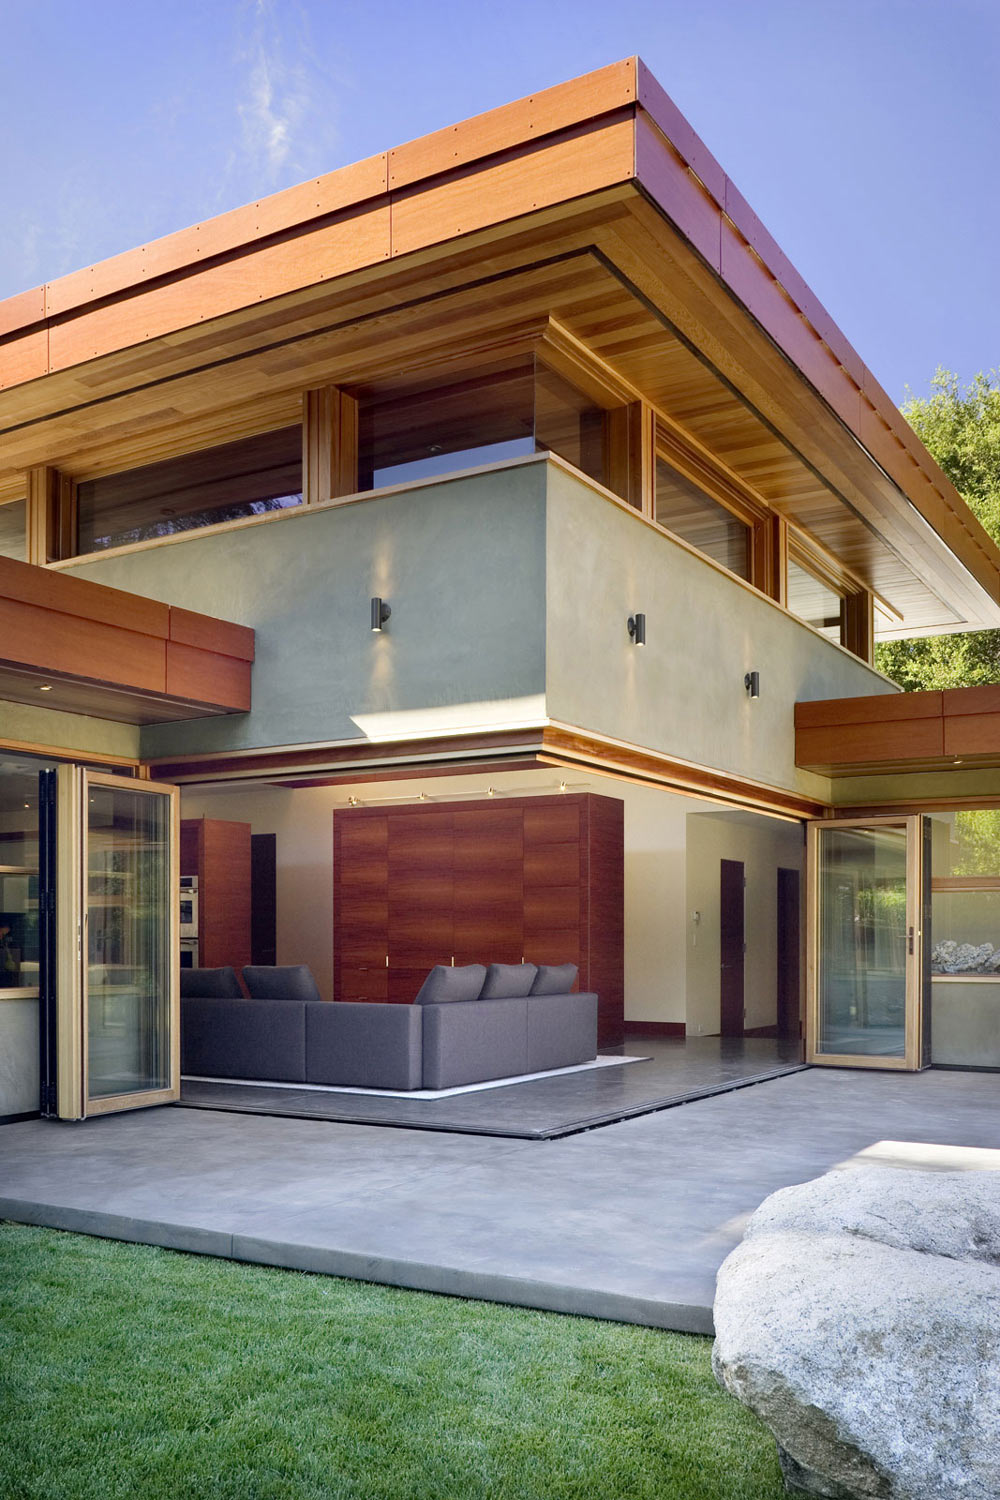 Terrace, Patio Doors, Wheeler Residence in Menlo Park, California by William Duff Architects